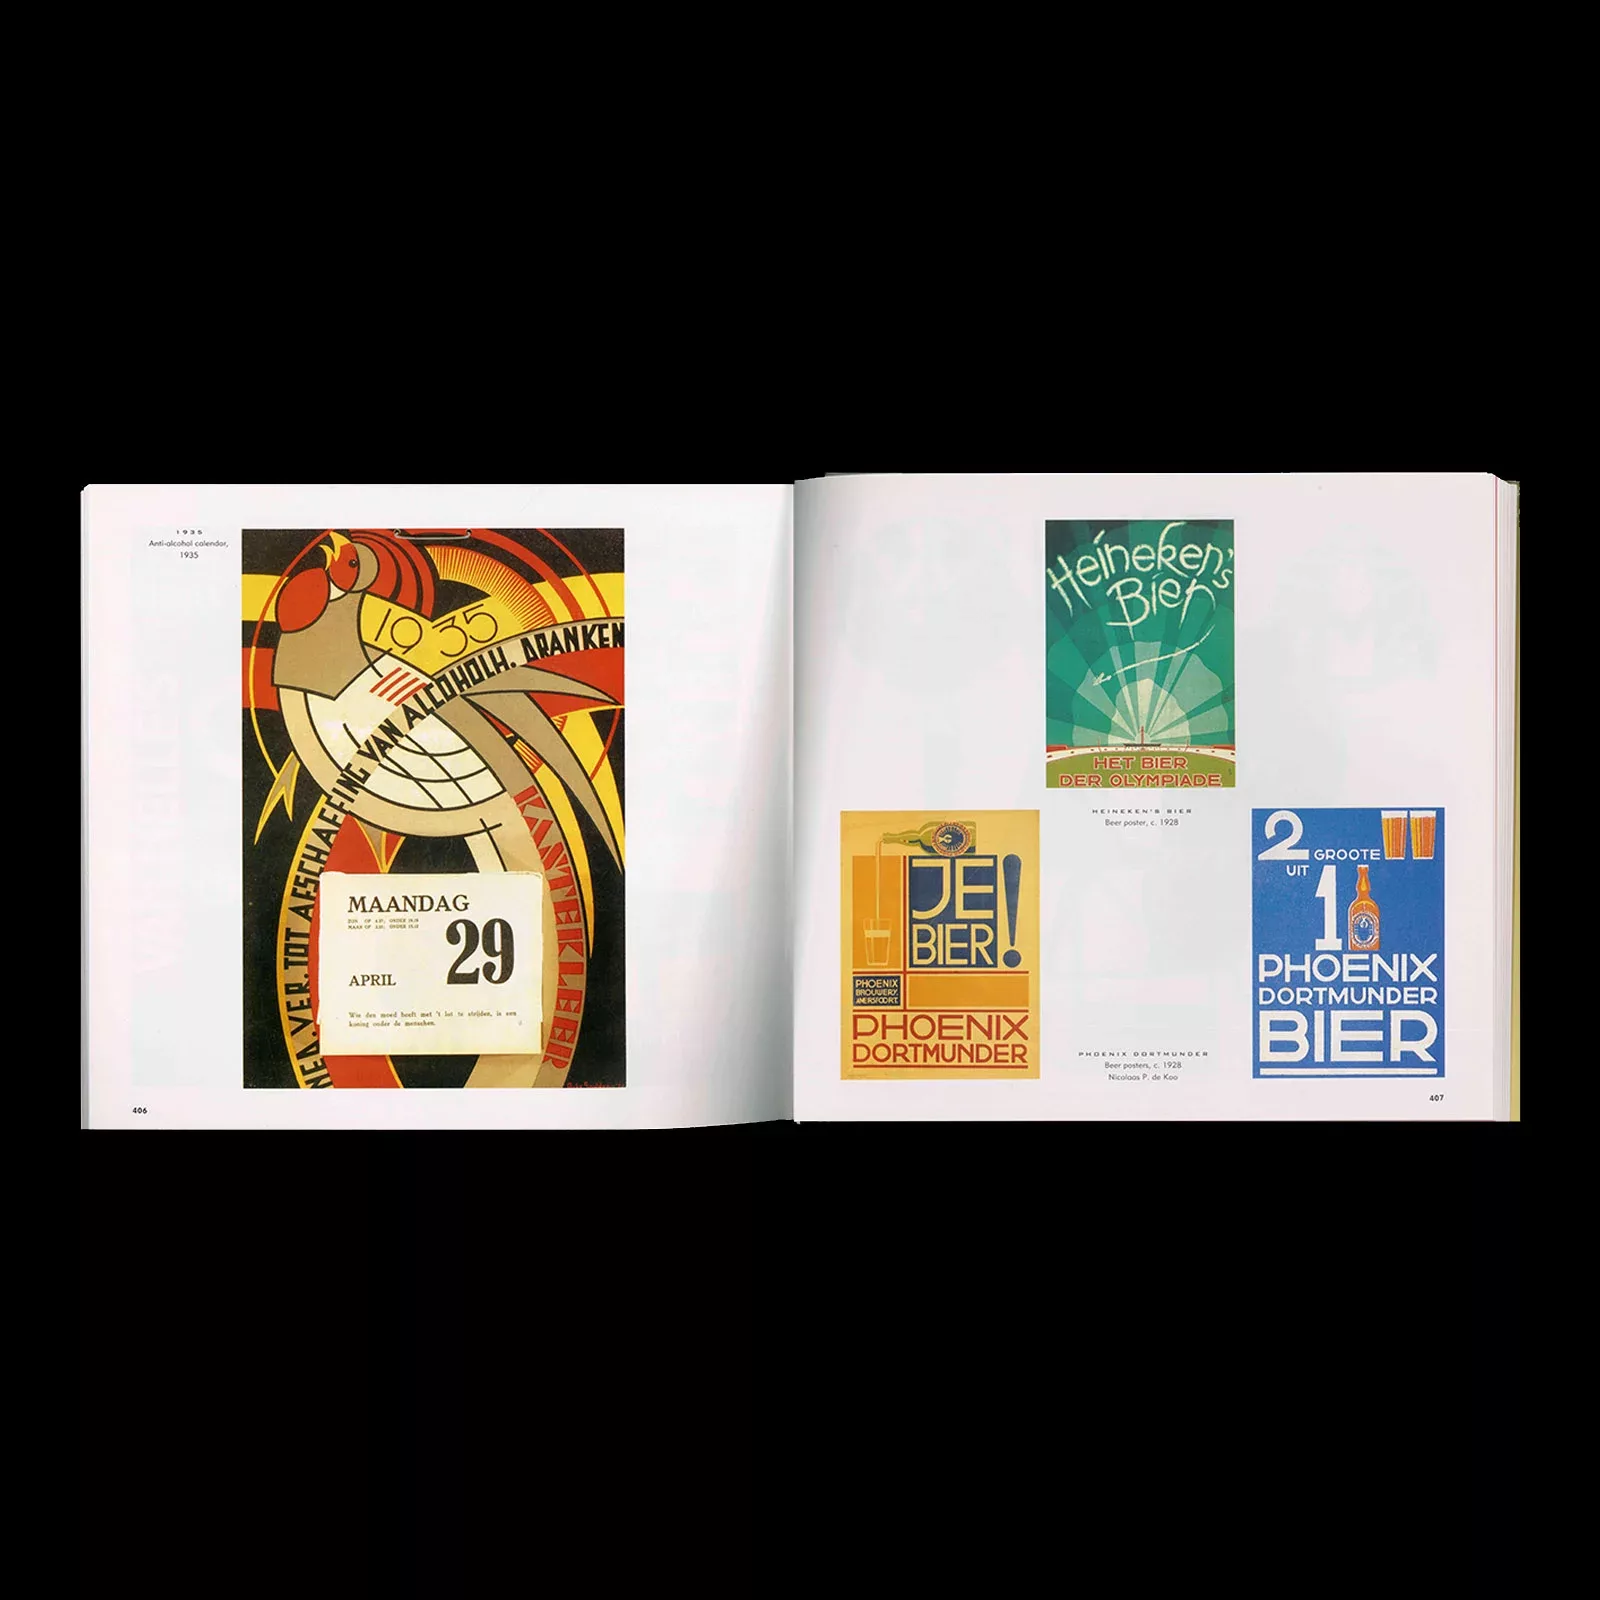 Euro Deco - Graphic Design Between The Wars, Chronicle Books, 2005